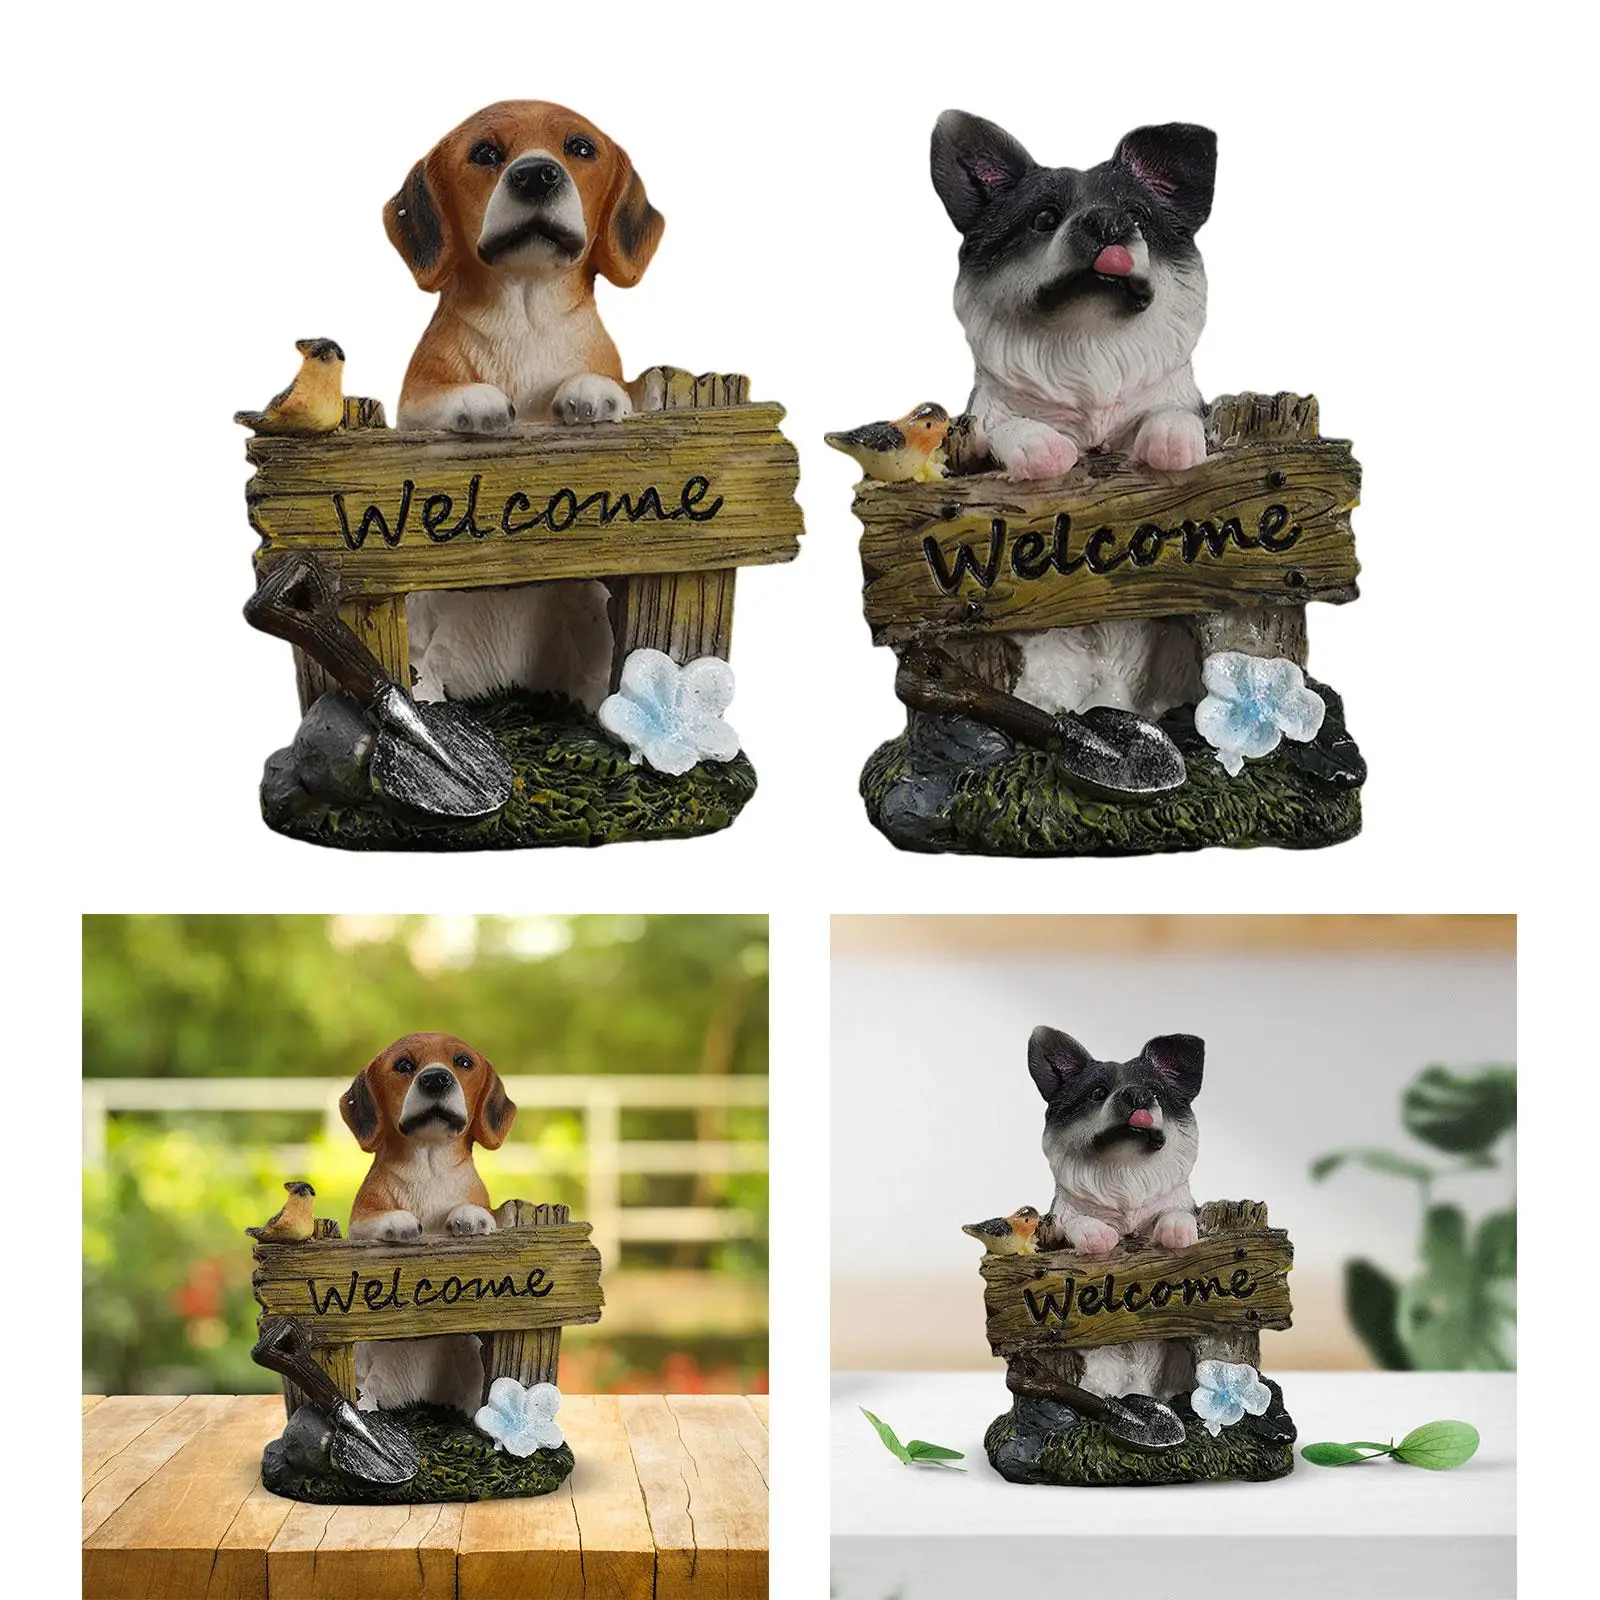 Garden Dog Statue Welcome Dog Statue Puppy Statue Tabletop Ornament Animal Sculpture for Balcony Desk Yard Indoor Outdoor House